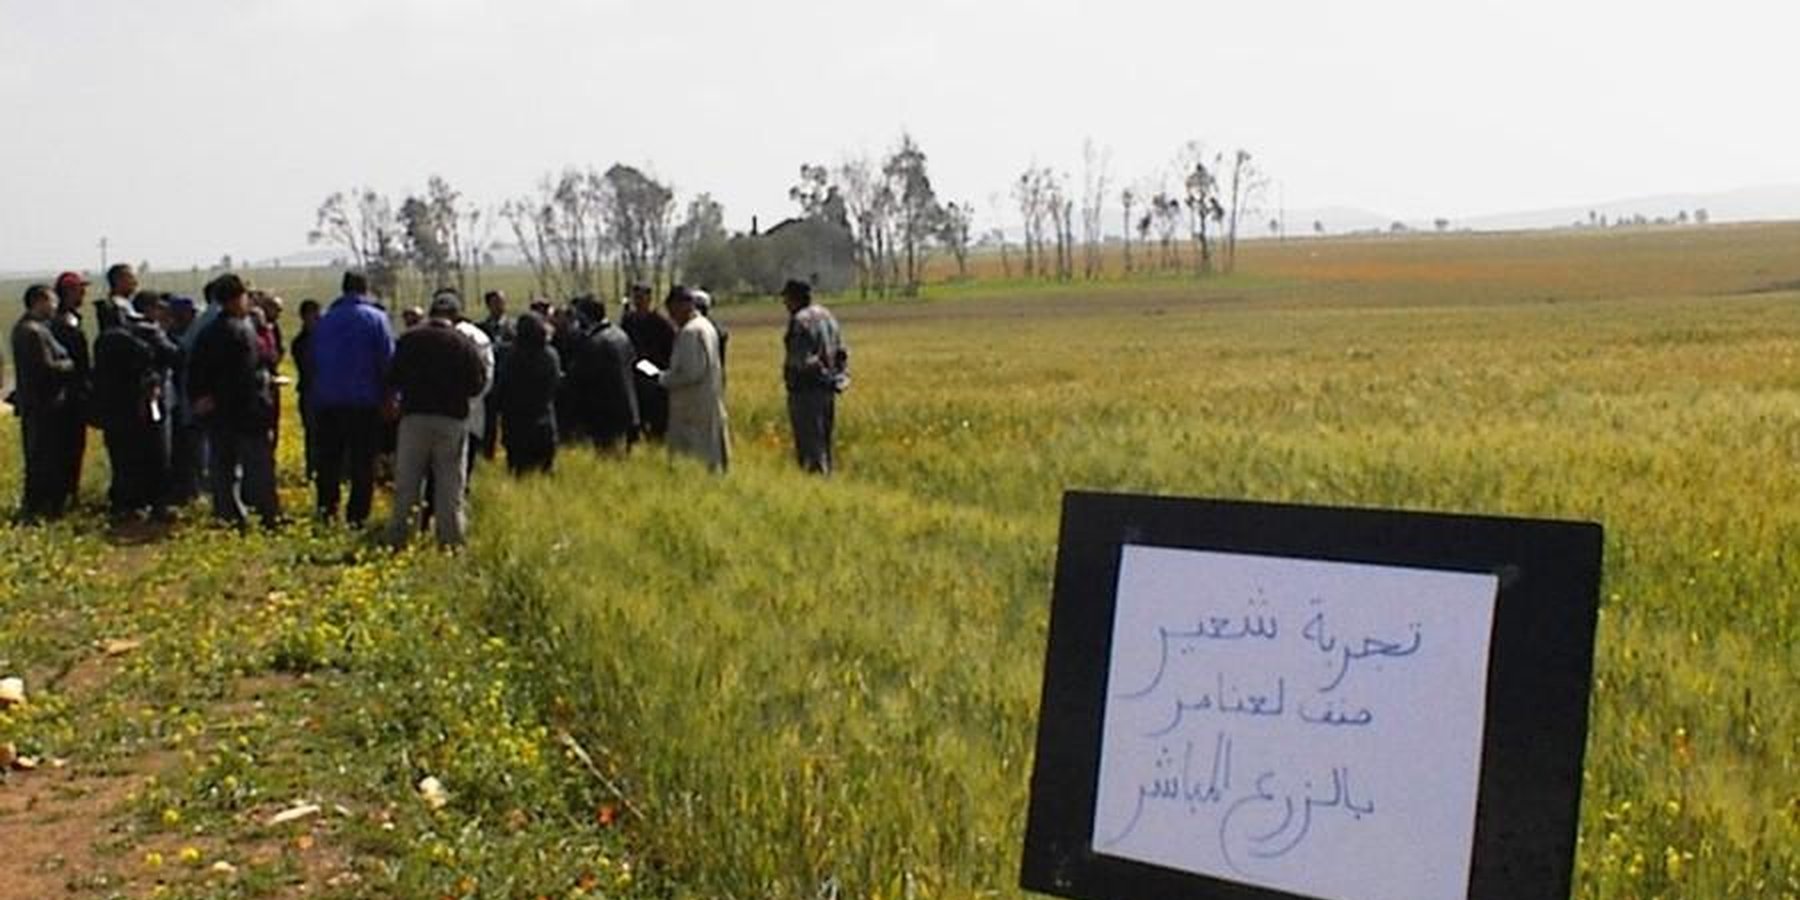  No-till field day in Benahmed region. The sign says: Trial with barley, direct seeding